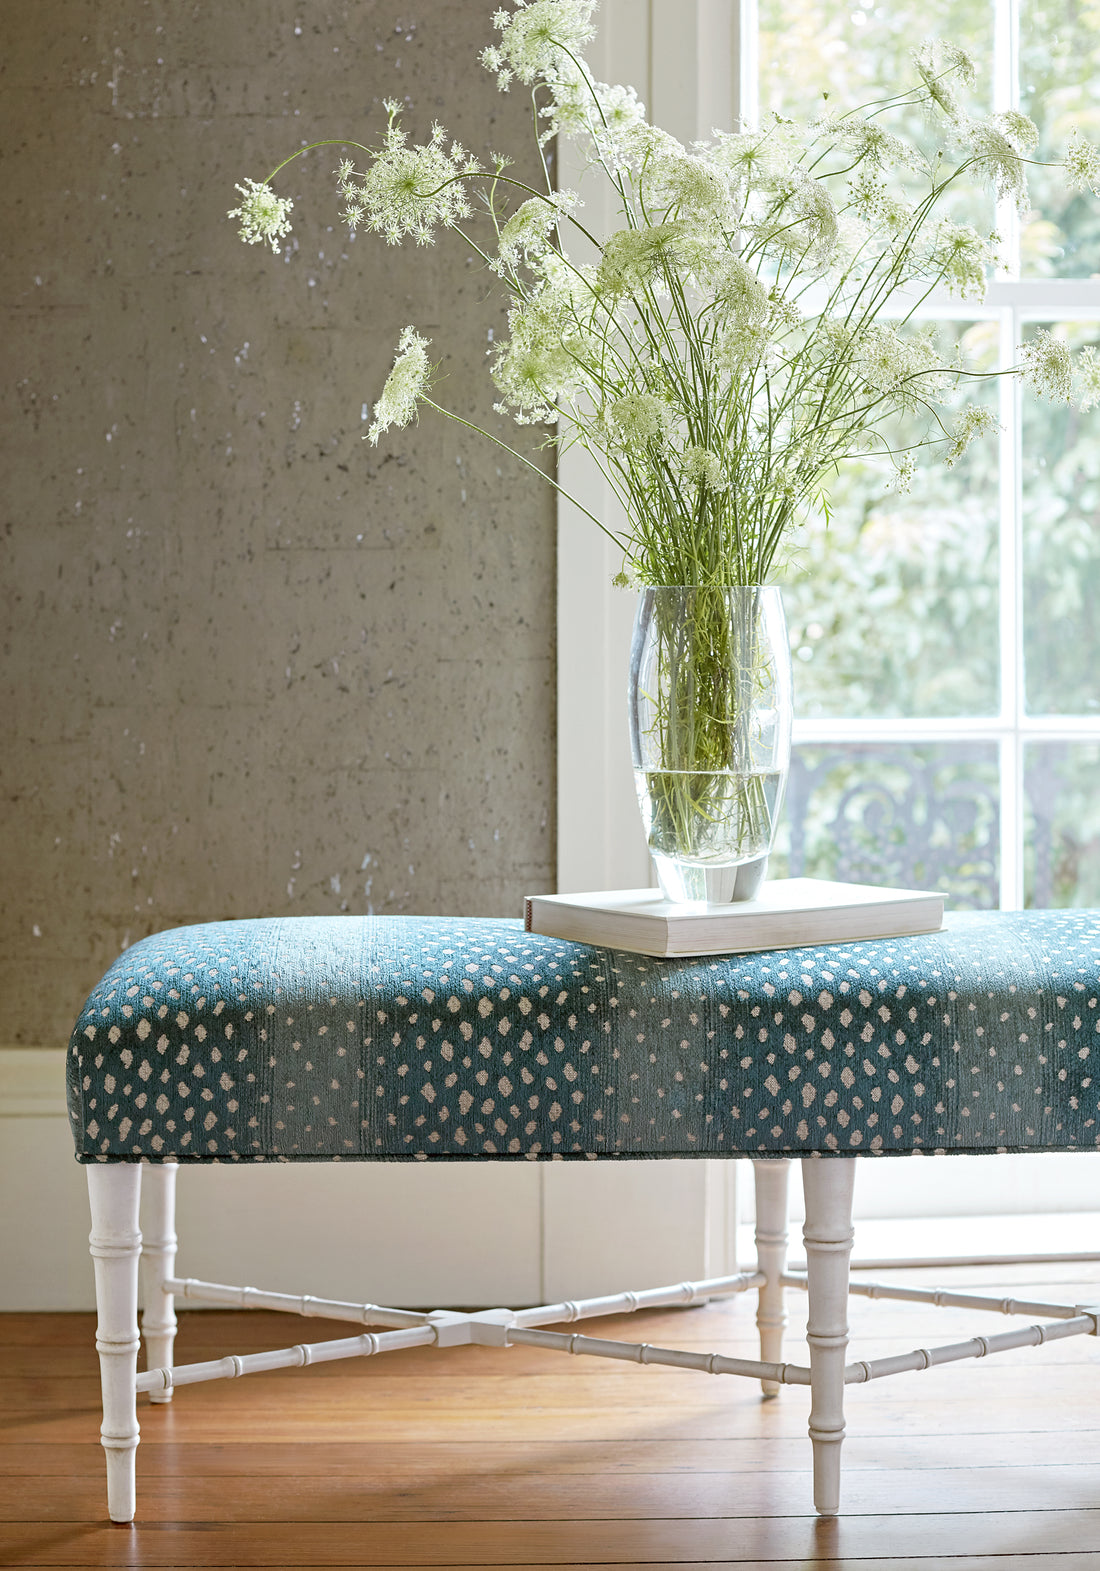 Eaton Ottoman in Gazelle woven fabric in peacock color - pattern number W80428 - by Thibaut in the Woven Resource Vol 10 Menagerie collection